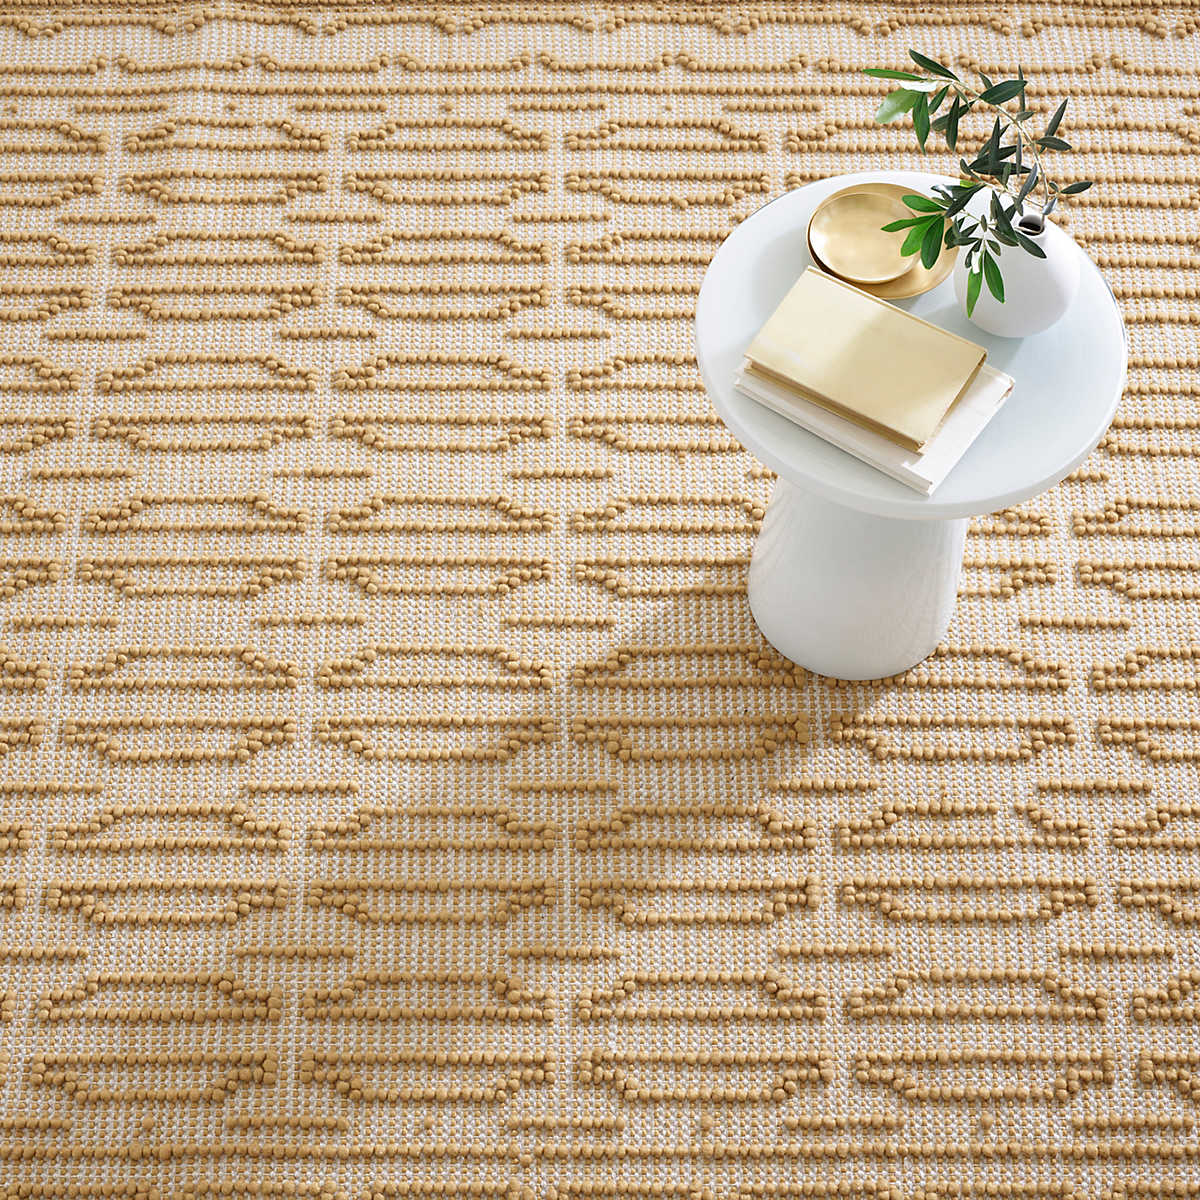 The Campbell Sand Rug relief pattern plays across a gently marled woven wool ground, accentuating the graphic dimension created by the different weaves. The central motif is repeated inversely to create a border around this sumptuous rug. Amethyst Home provides interior design services, furniture, rugs, and lighting in the Miami metro area.